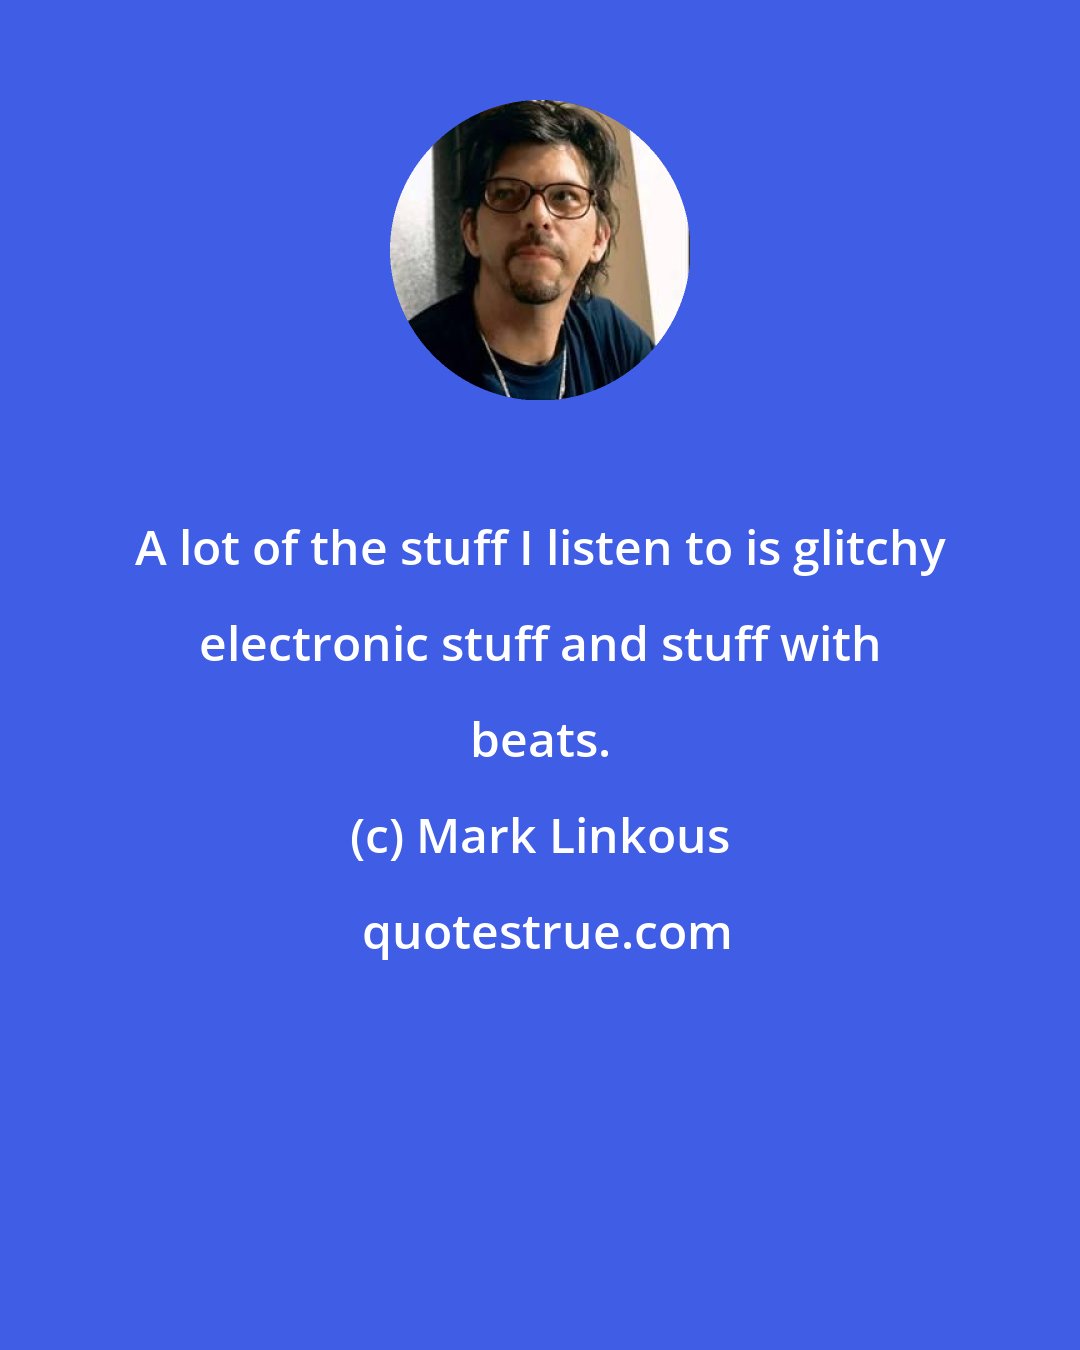 Mark Linkous: A lot of the stuff I listen to is glitchy electronic stuff and stuff with beats.